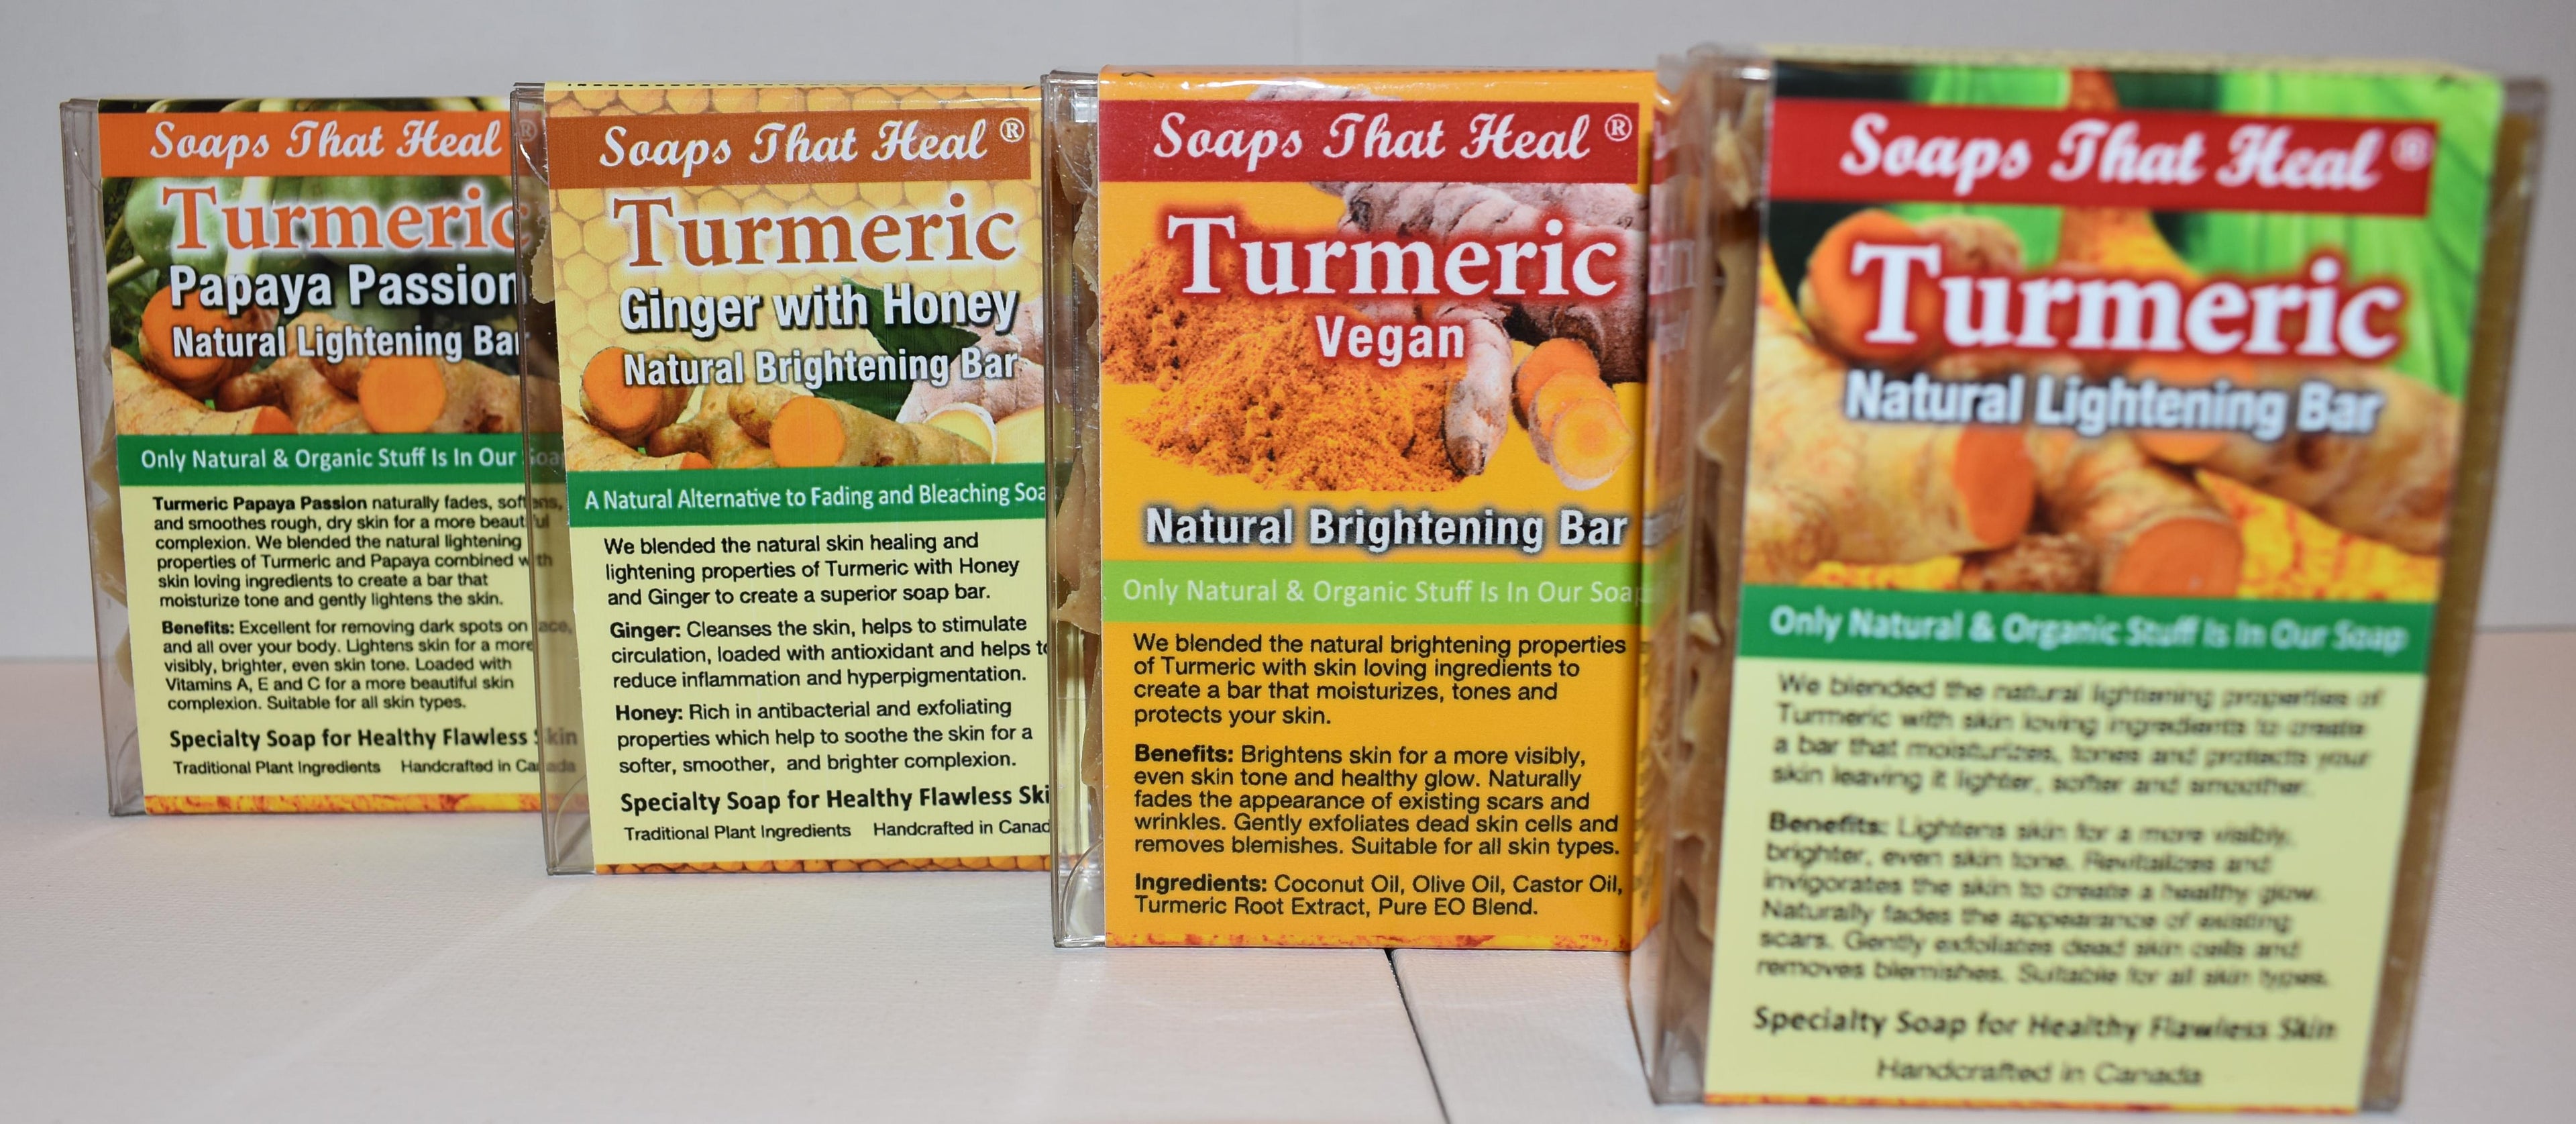 what are the benefits of turmeric for the skin, turmeric natural lightening soap, soaps that heal